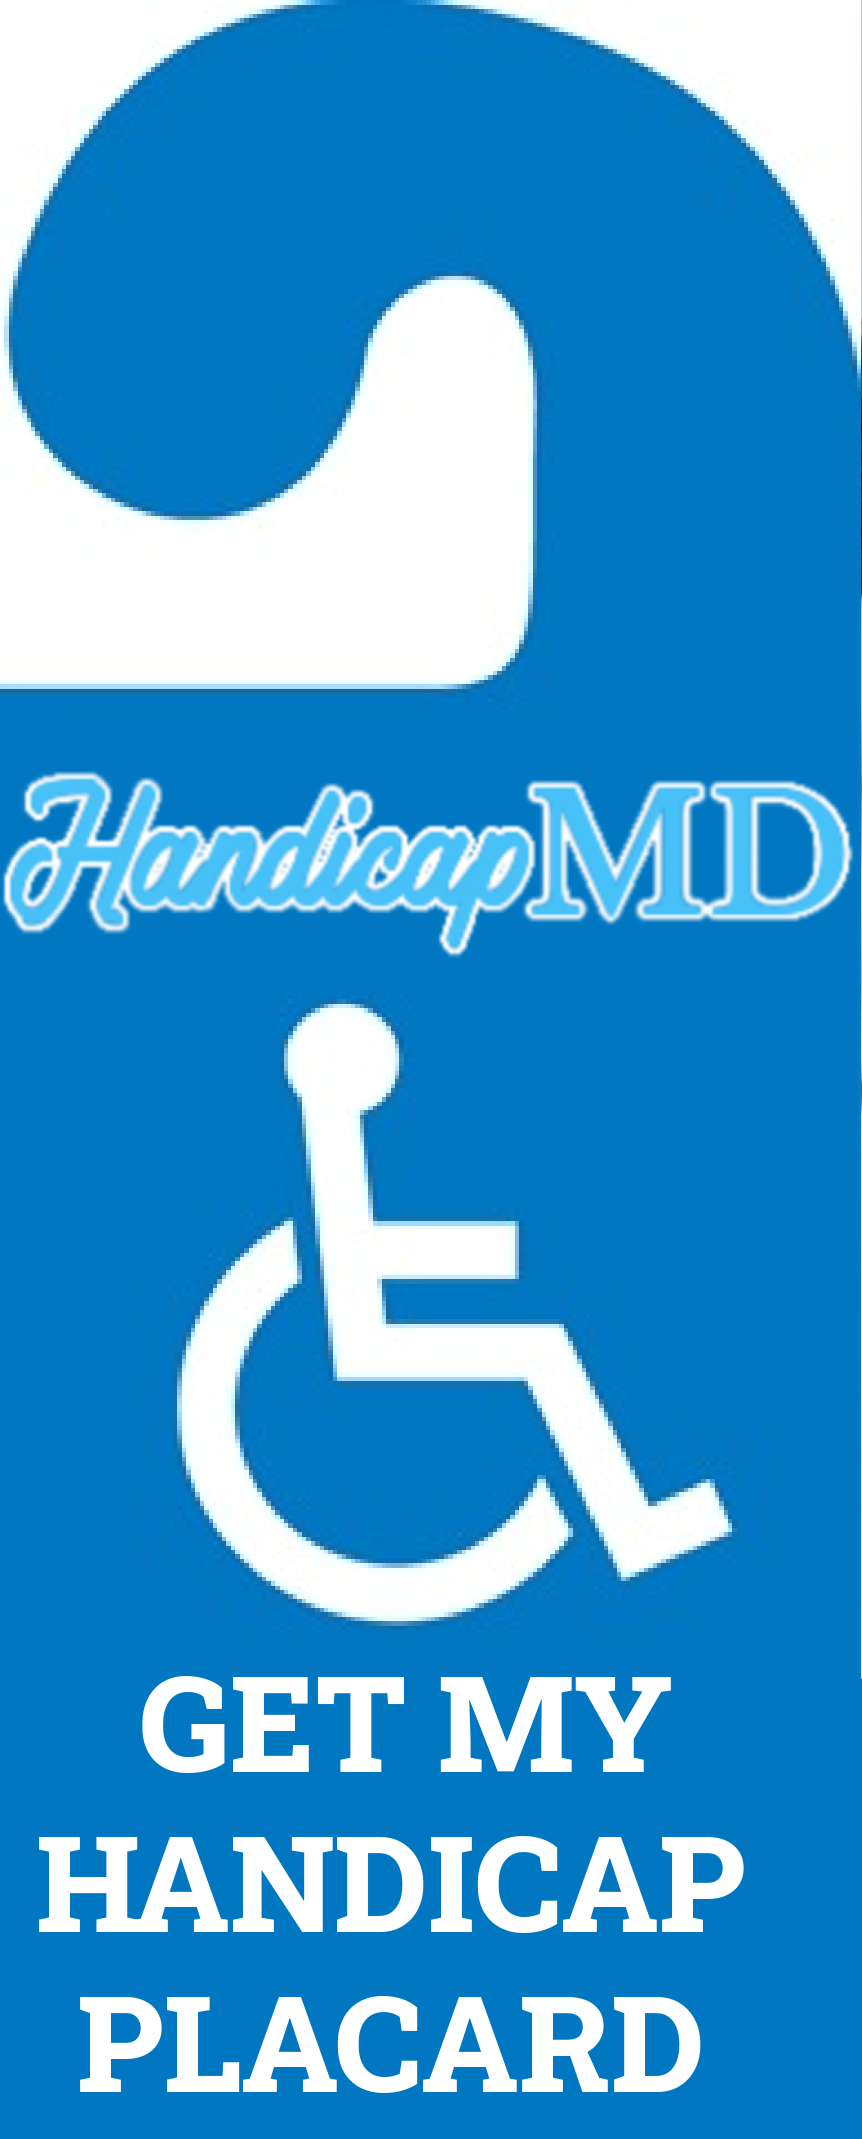 Good Information on Temporary Disabled Parking Permits